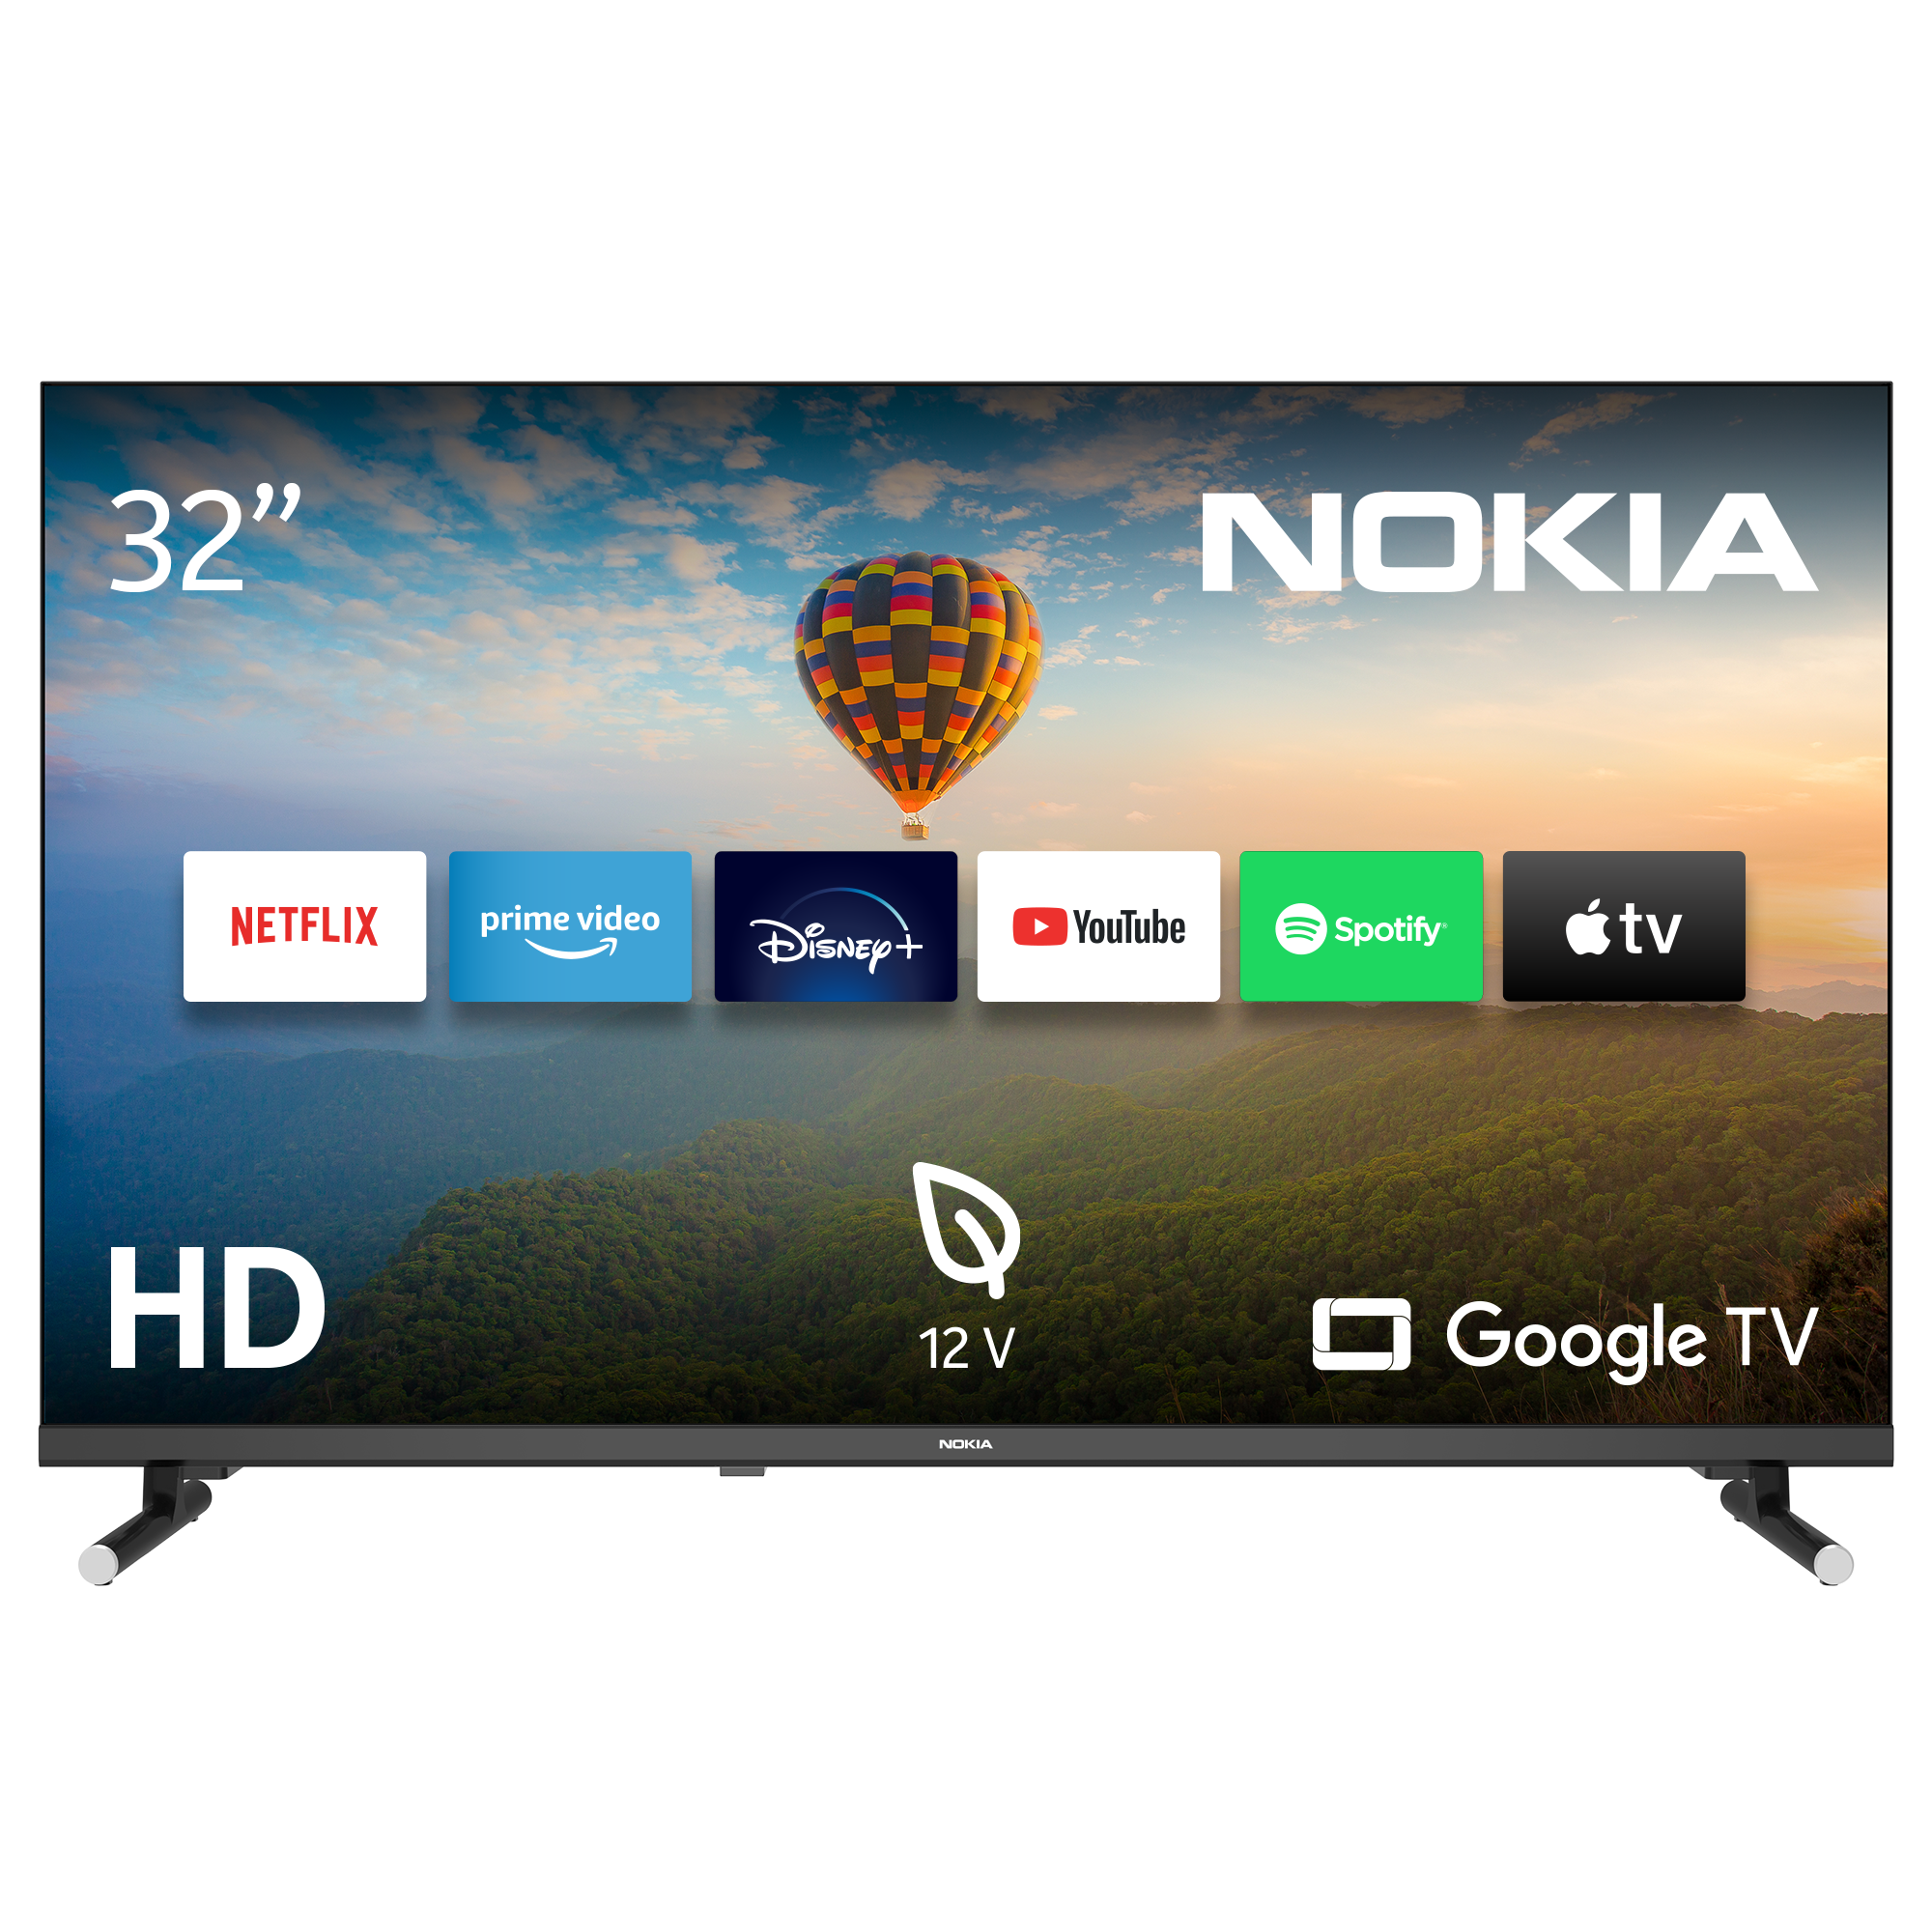 NOKIA HN32GE320C LED TV 81 TV, Android) HD, SMART / (Flat, Zoll cm, 32